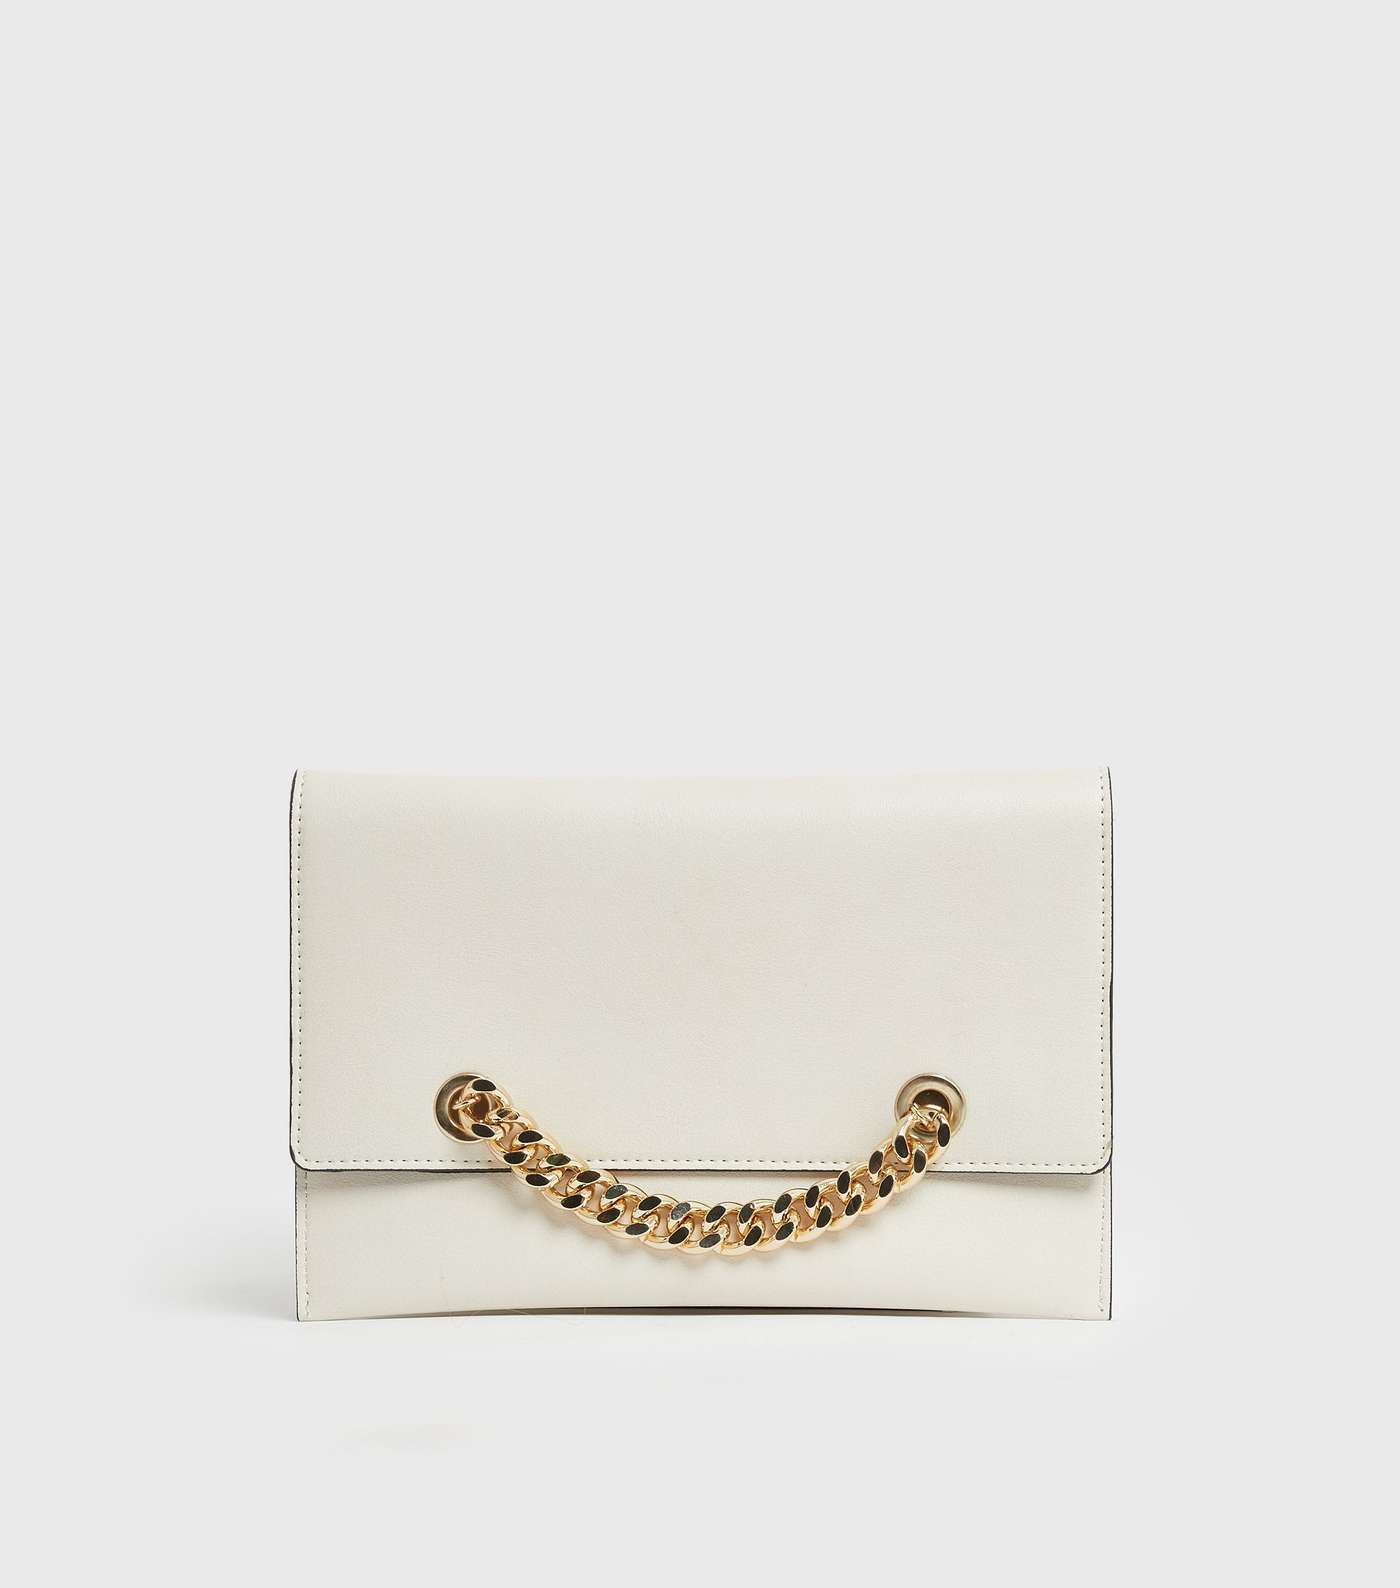 Cream Leather-Look Chain Clutch Bag